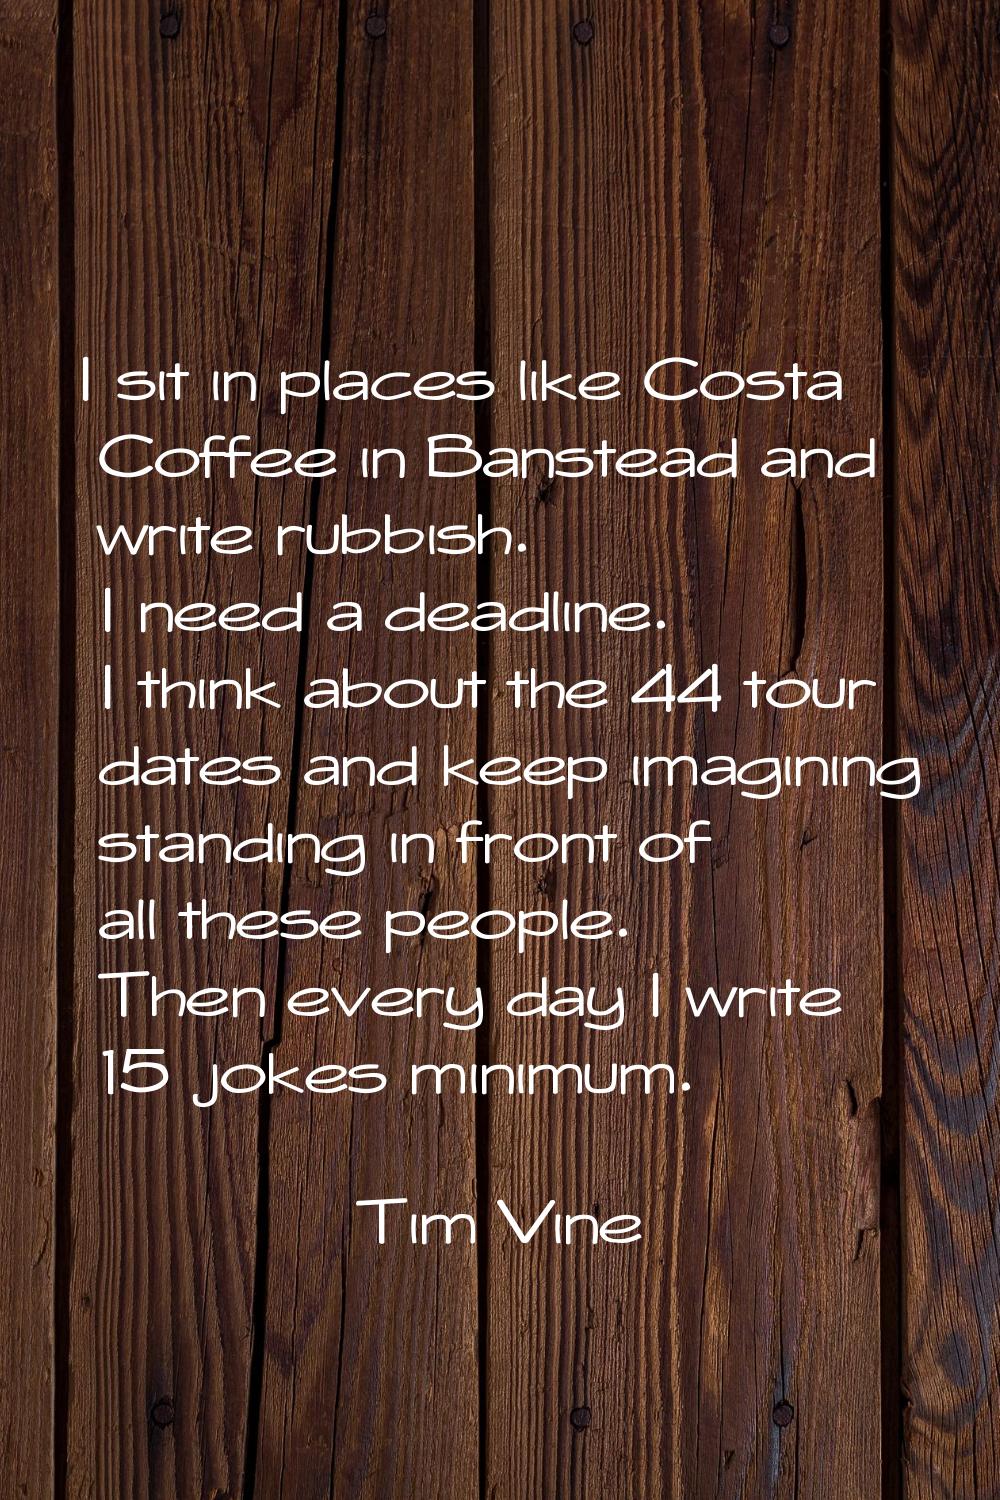 I sit in places like Costa Coffee in Banstead and write rubbish. I need a deadline. I think about t